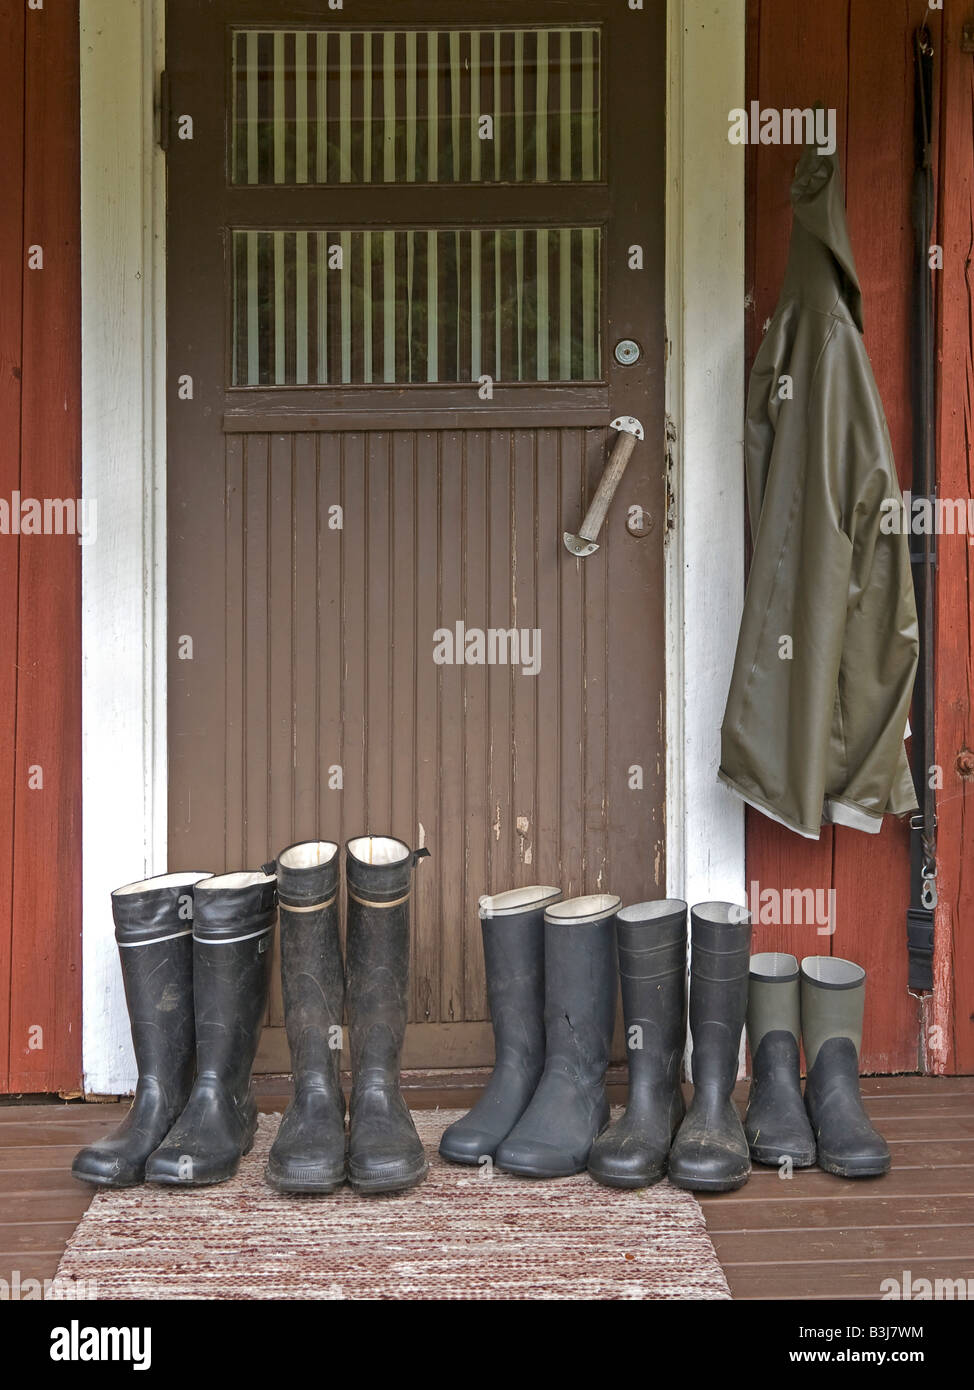 row of rubber boots in front of door of a typical red timber wooden house in Finland Stock Photo